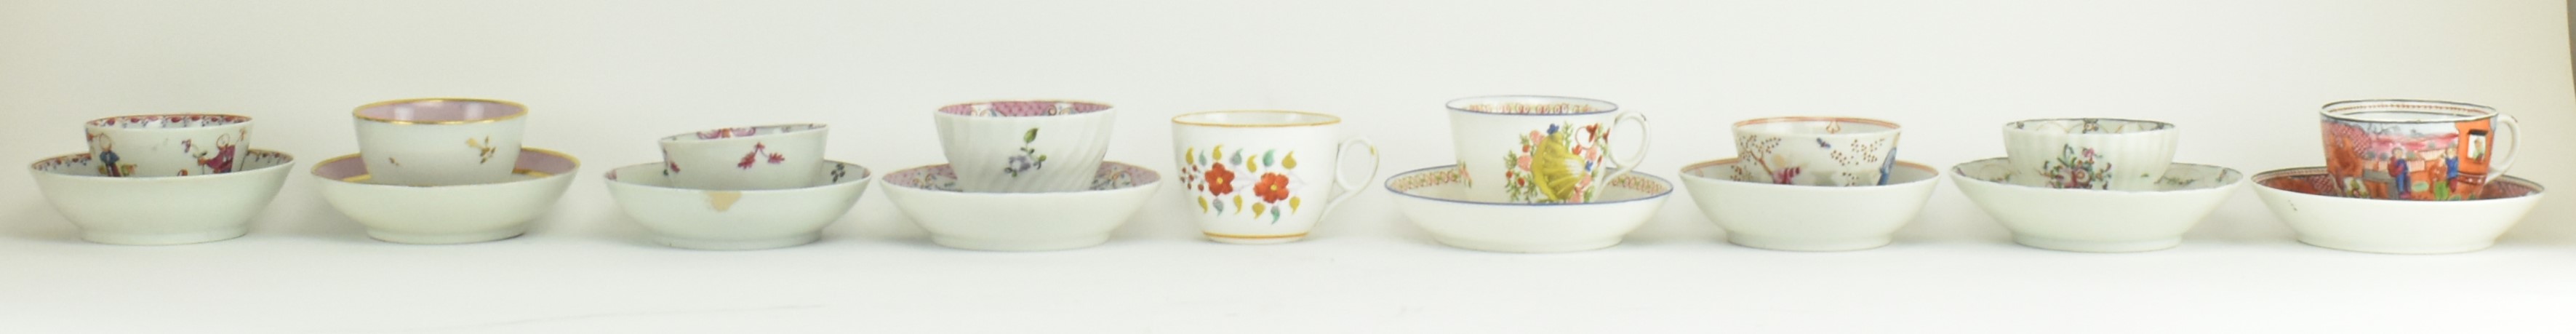 GROUP OF 18TH CENTURY NEWHALL PORCELAIN CUPS AND SAUCERS